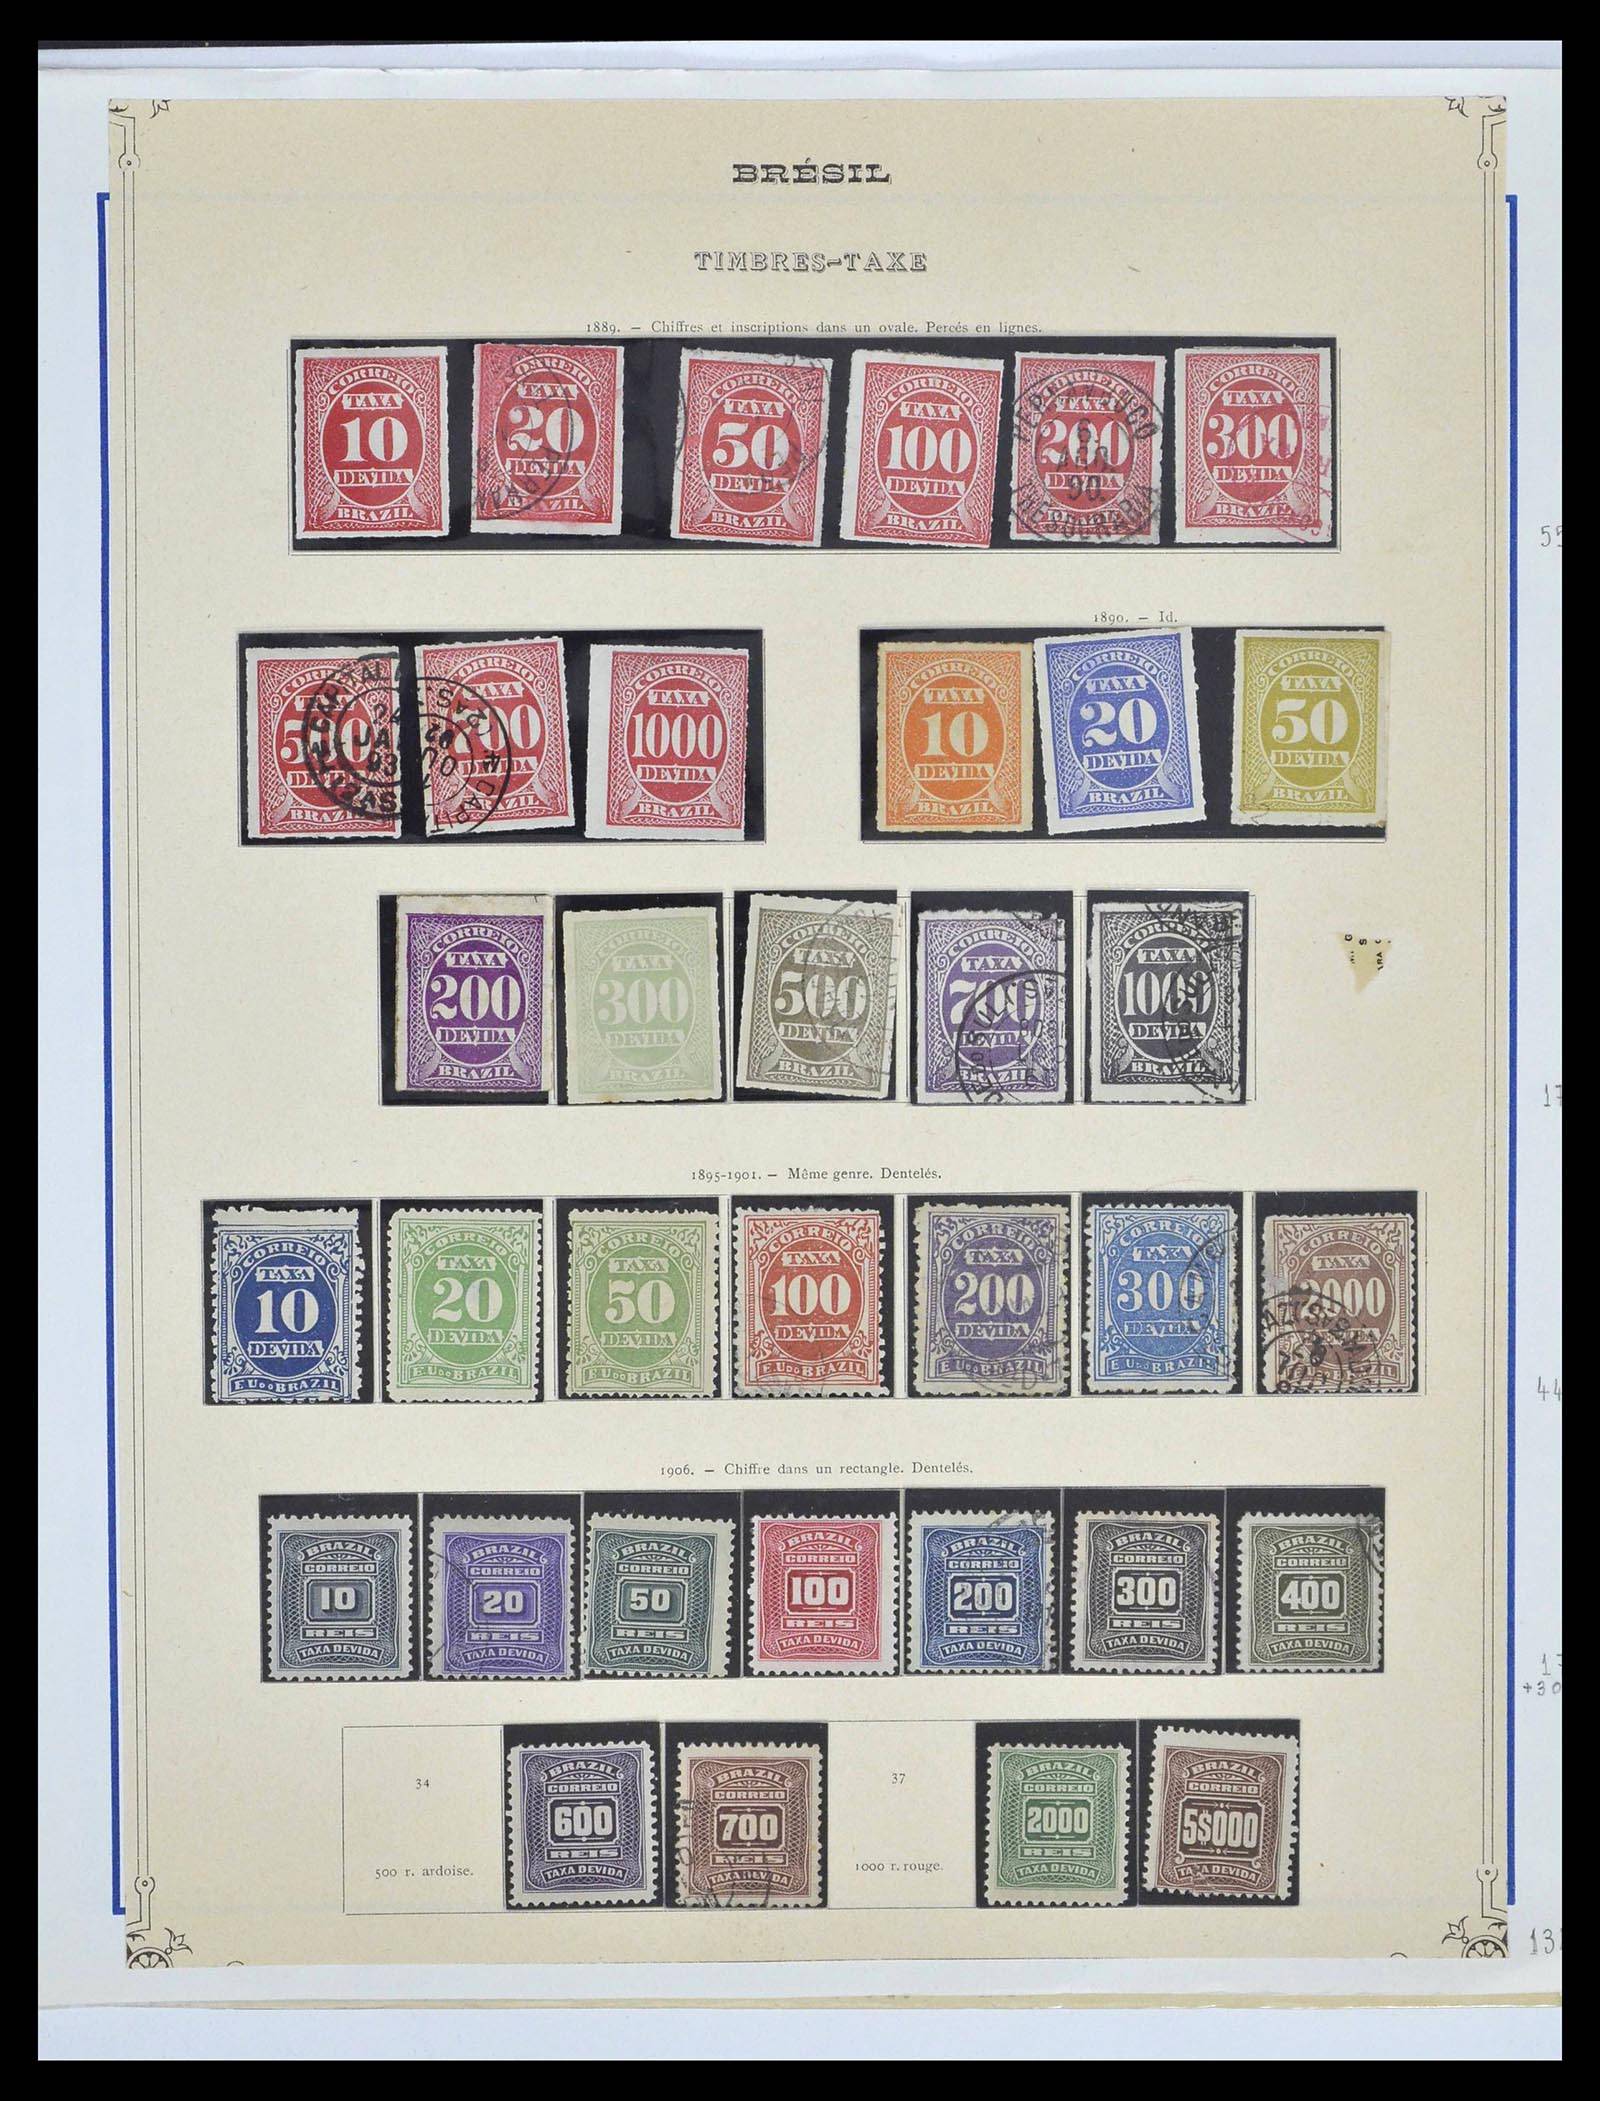 39245 0080 - Stamp collection 39245 Brazil 1843-1968.